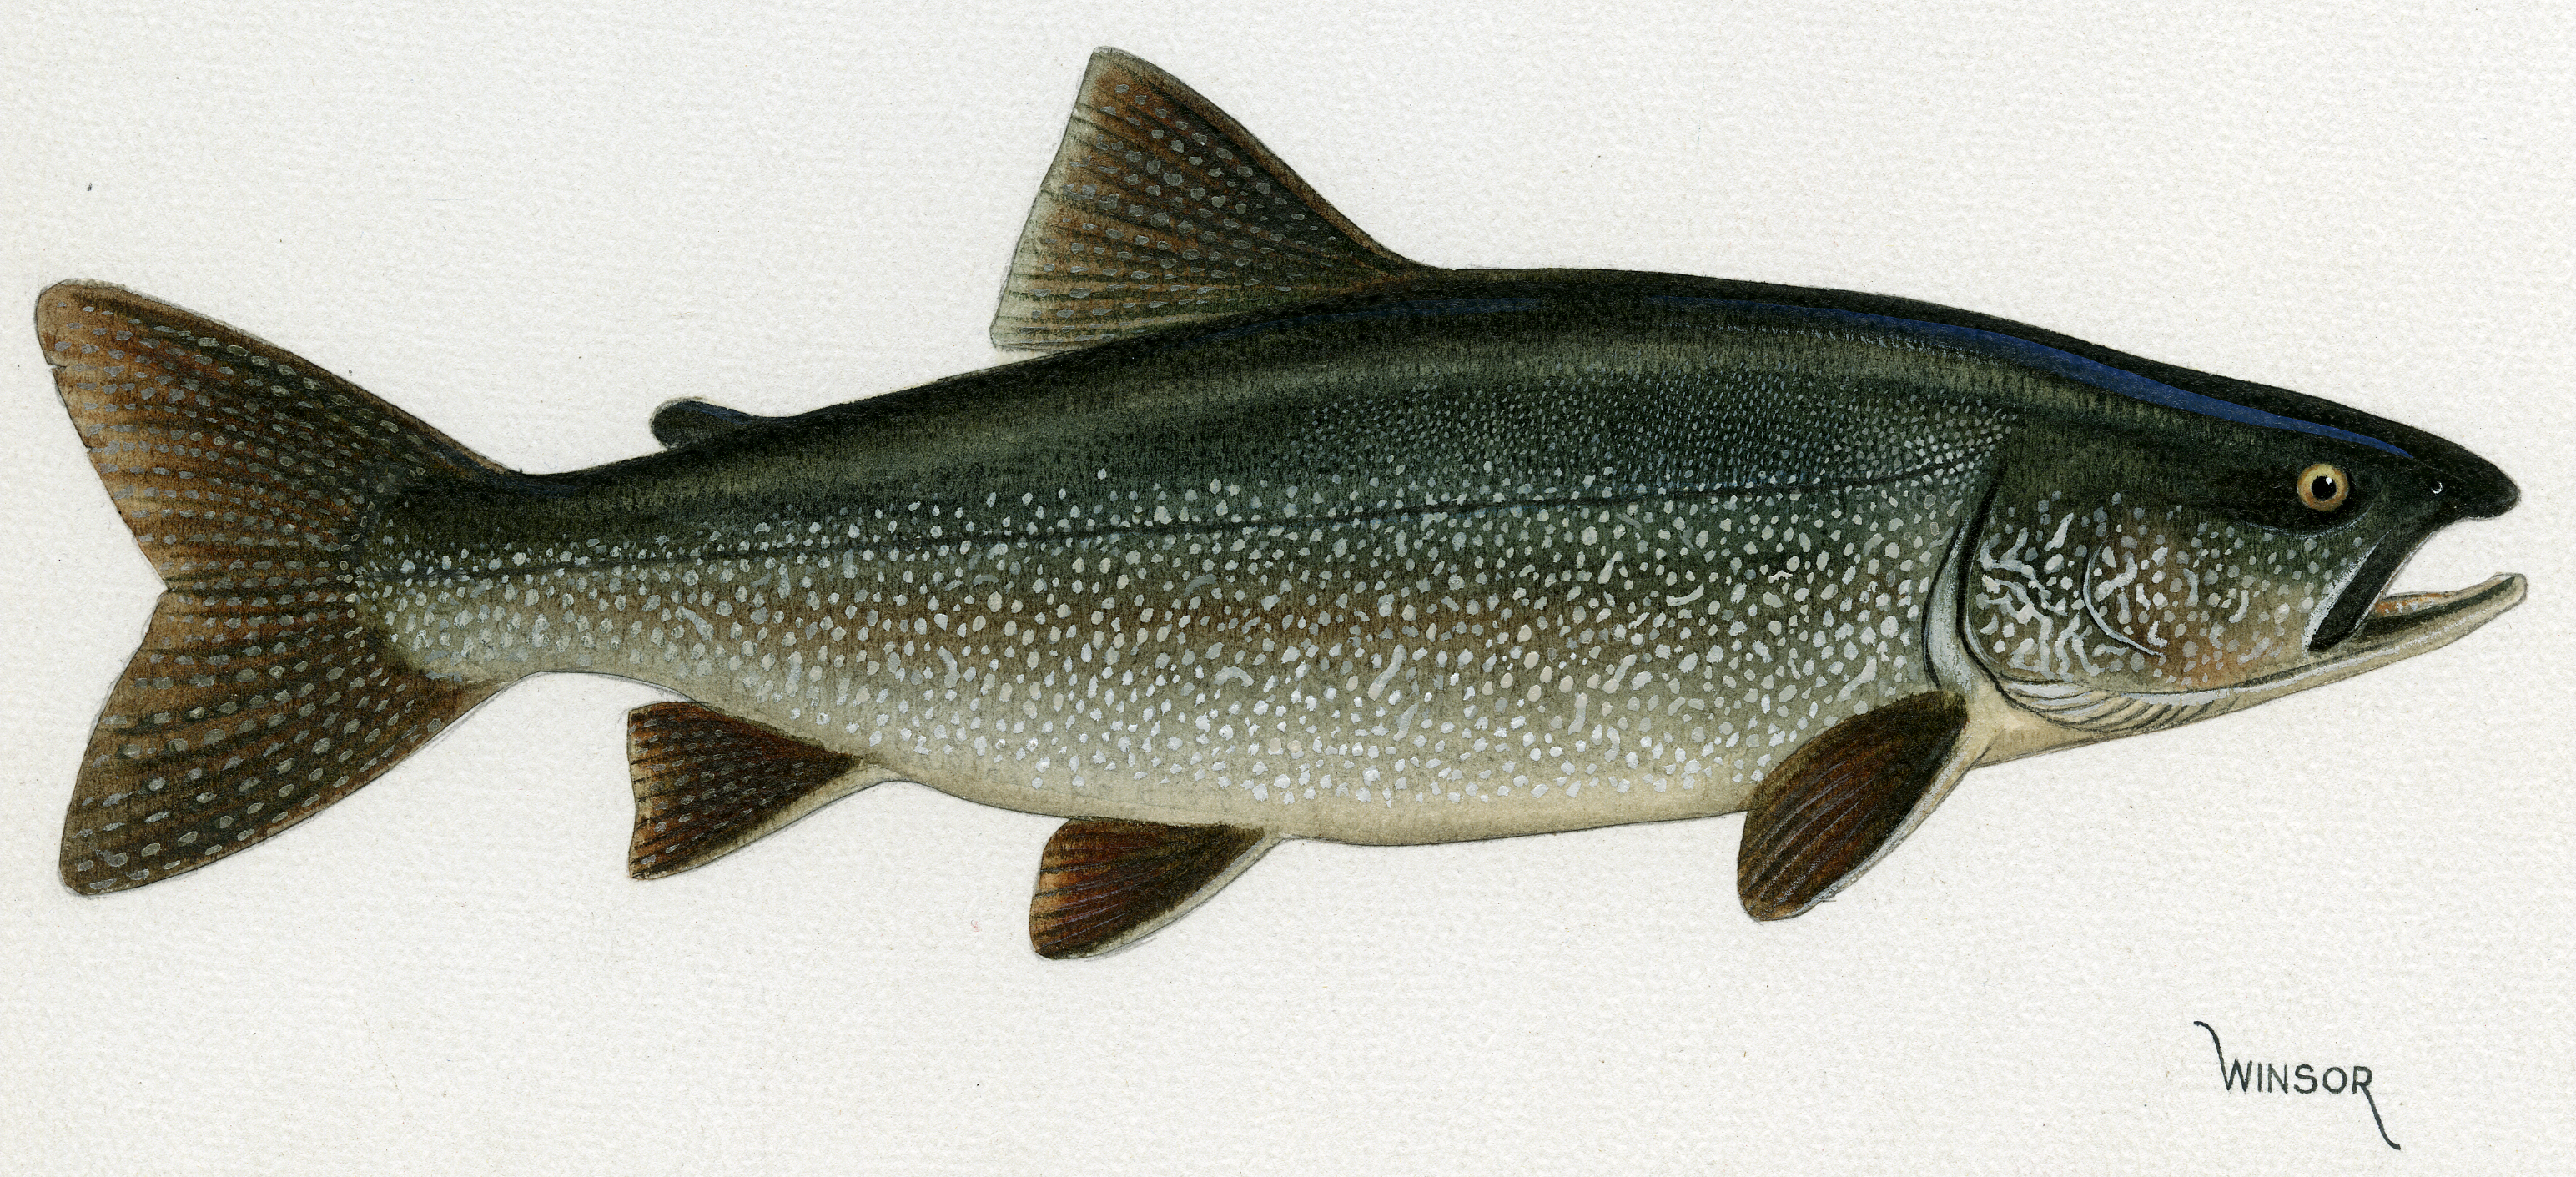 drawing on a white background of a white-speckled greenish brown fish with 3 fins on the bottom, 1 fin on the top, and a tailfin